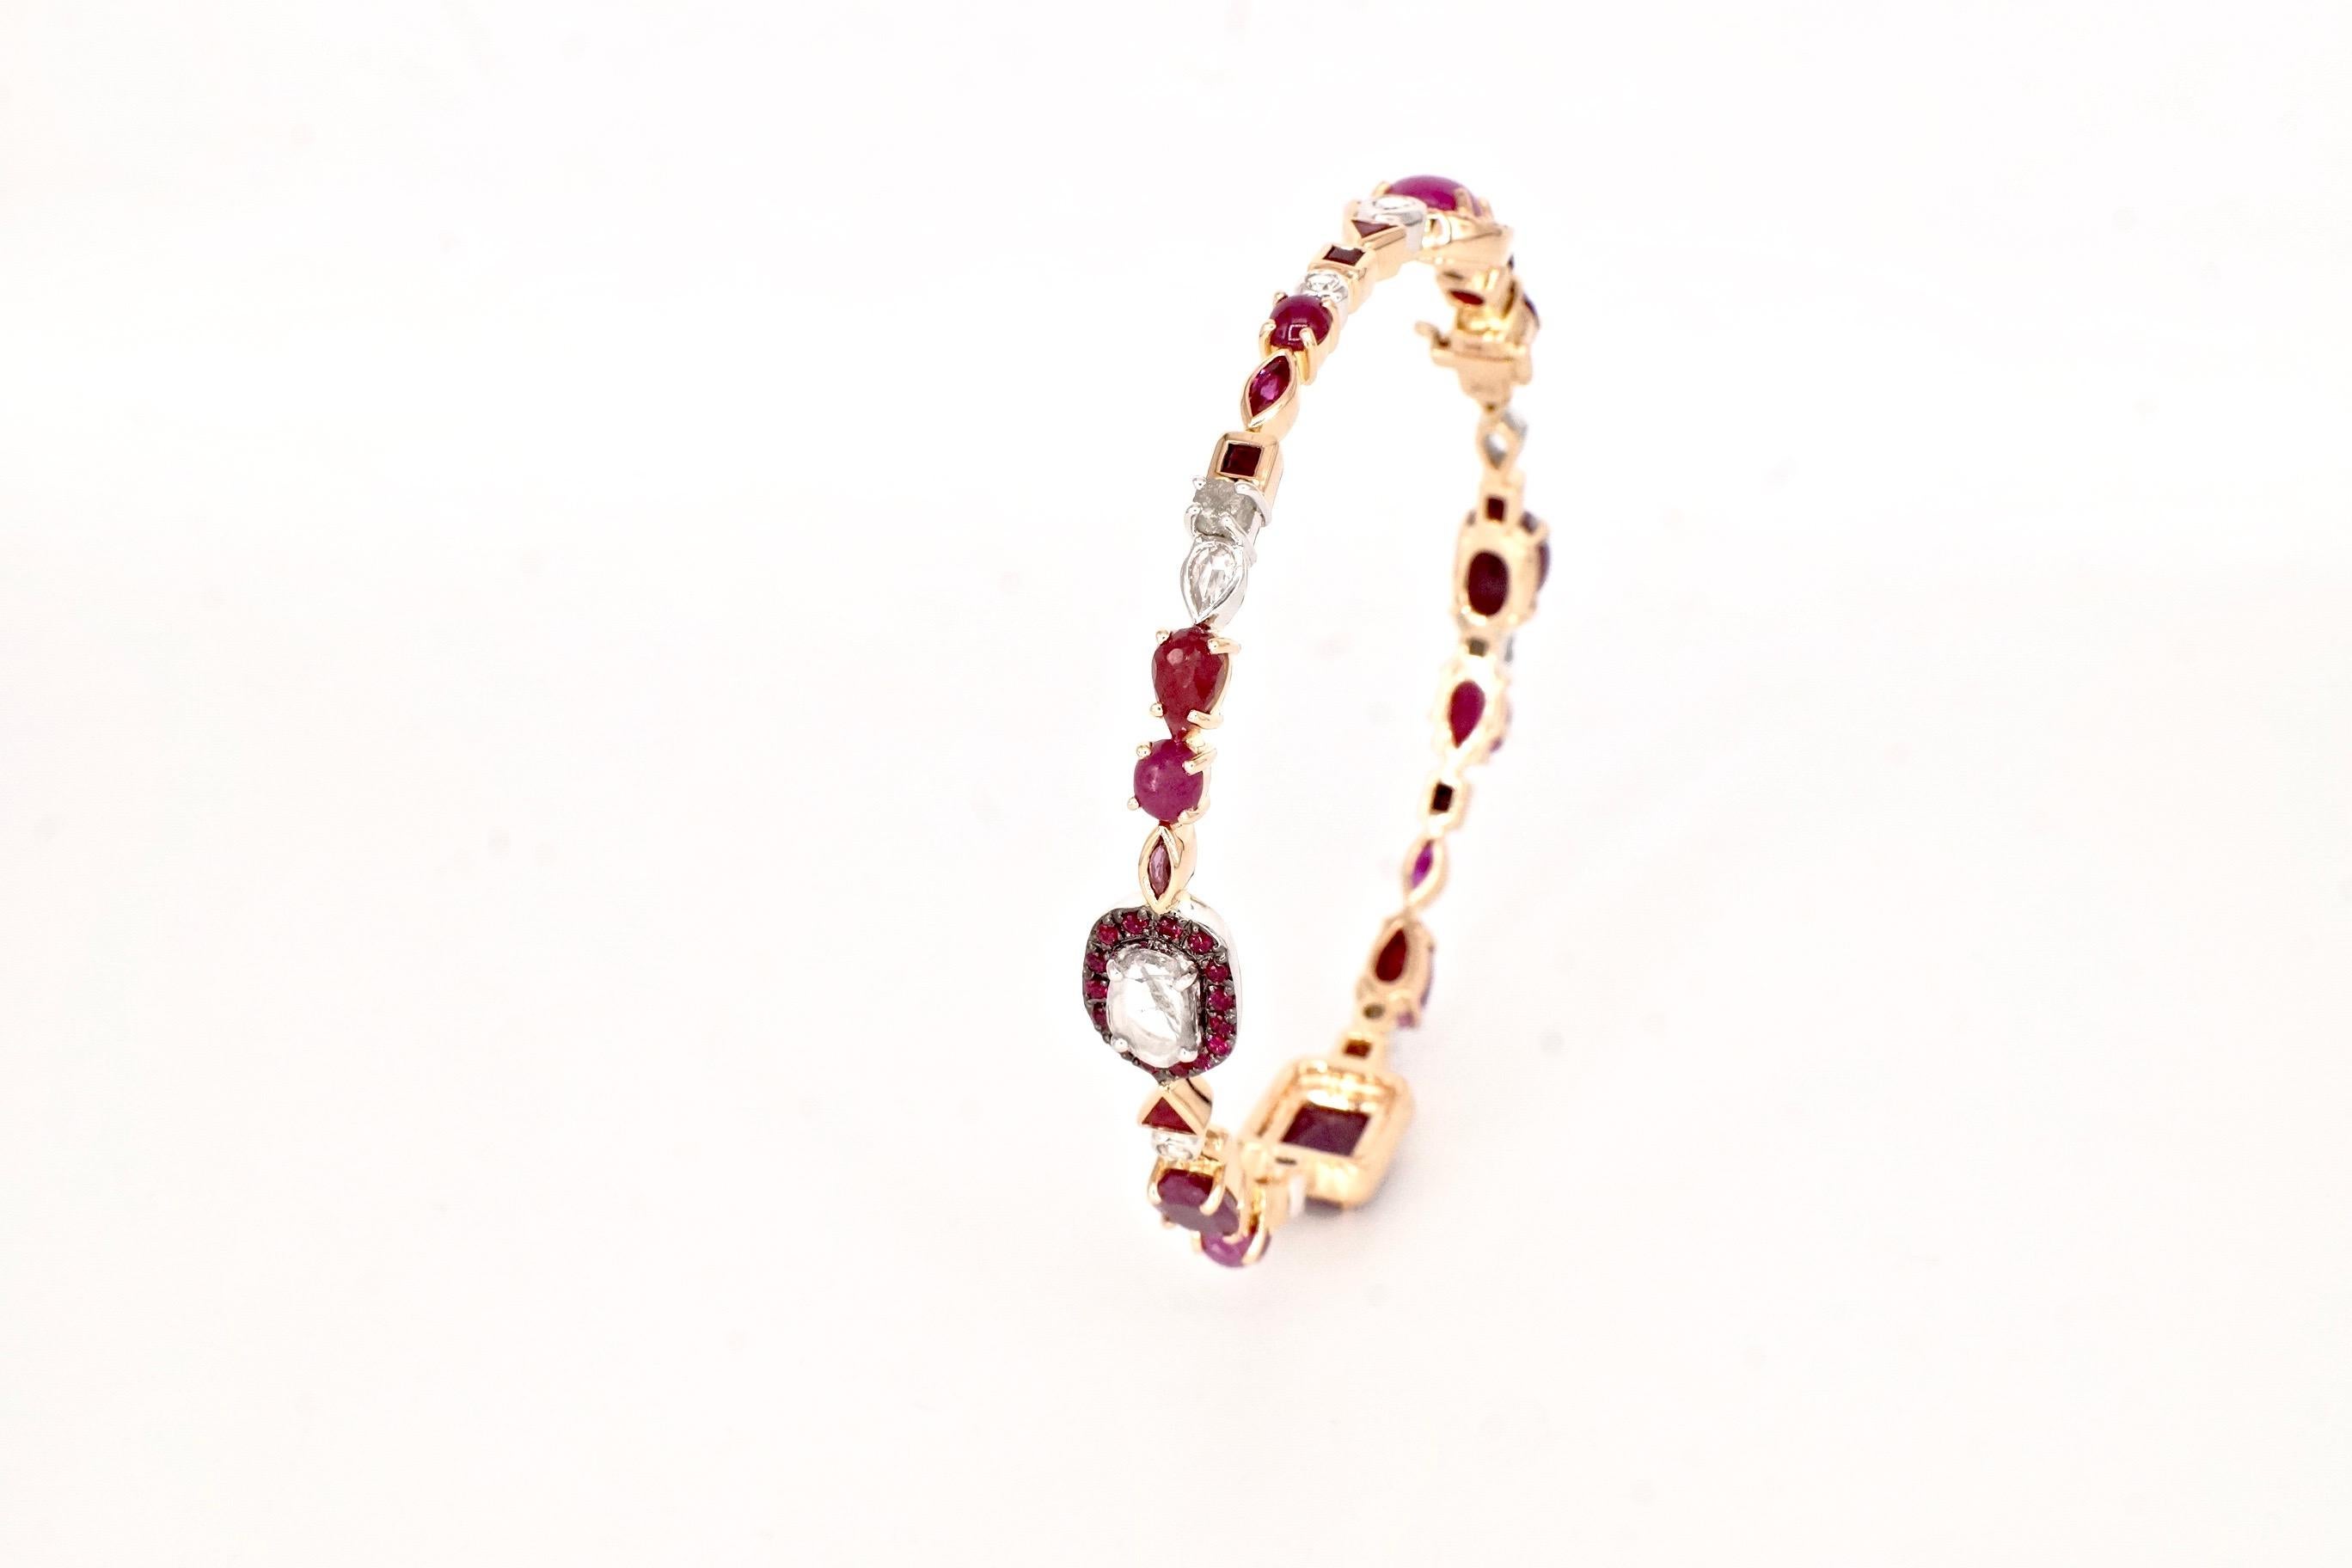 Ruby Baby Bangle 
An eighteen-karat rose gold hinged bangle set entirely with white diamonds and rubies in a variety of shapes and sizes
Diamond Total Weight – 1.69 cts.
Gemstone Total Weight – 18.36 cts.
This piece is one-of-a-kind and entirely